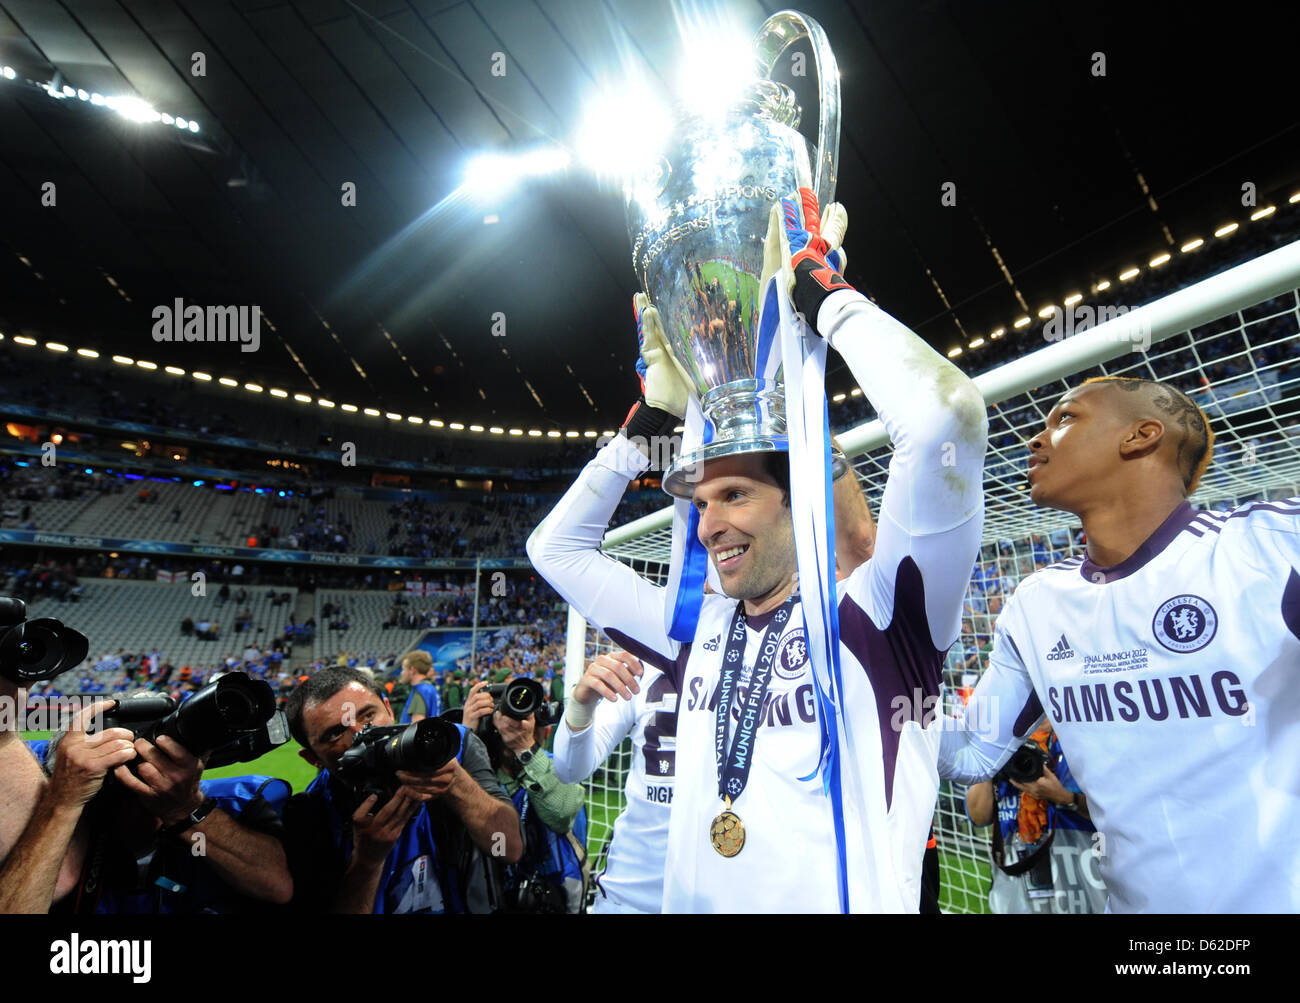 Chelsea's Petr Cech celebrates with the trophy after the UEFA Champions League soccer final between FC Bayern Munich and FC Chelsea at Fußball Arena München in Munich, Germany, 19 May 2012. Photo: Tobias Hase dpa/lby  +++(c) dpa - Bildfunk+++ Stock Photo